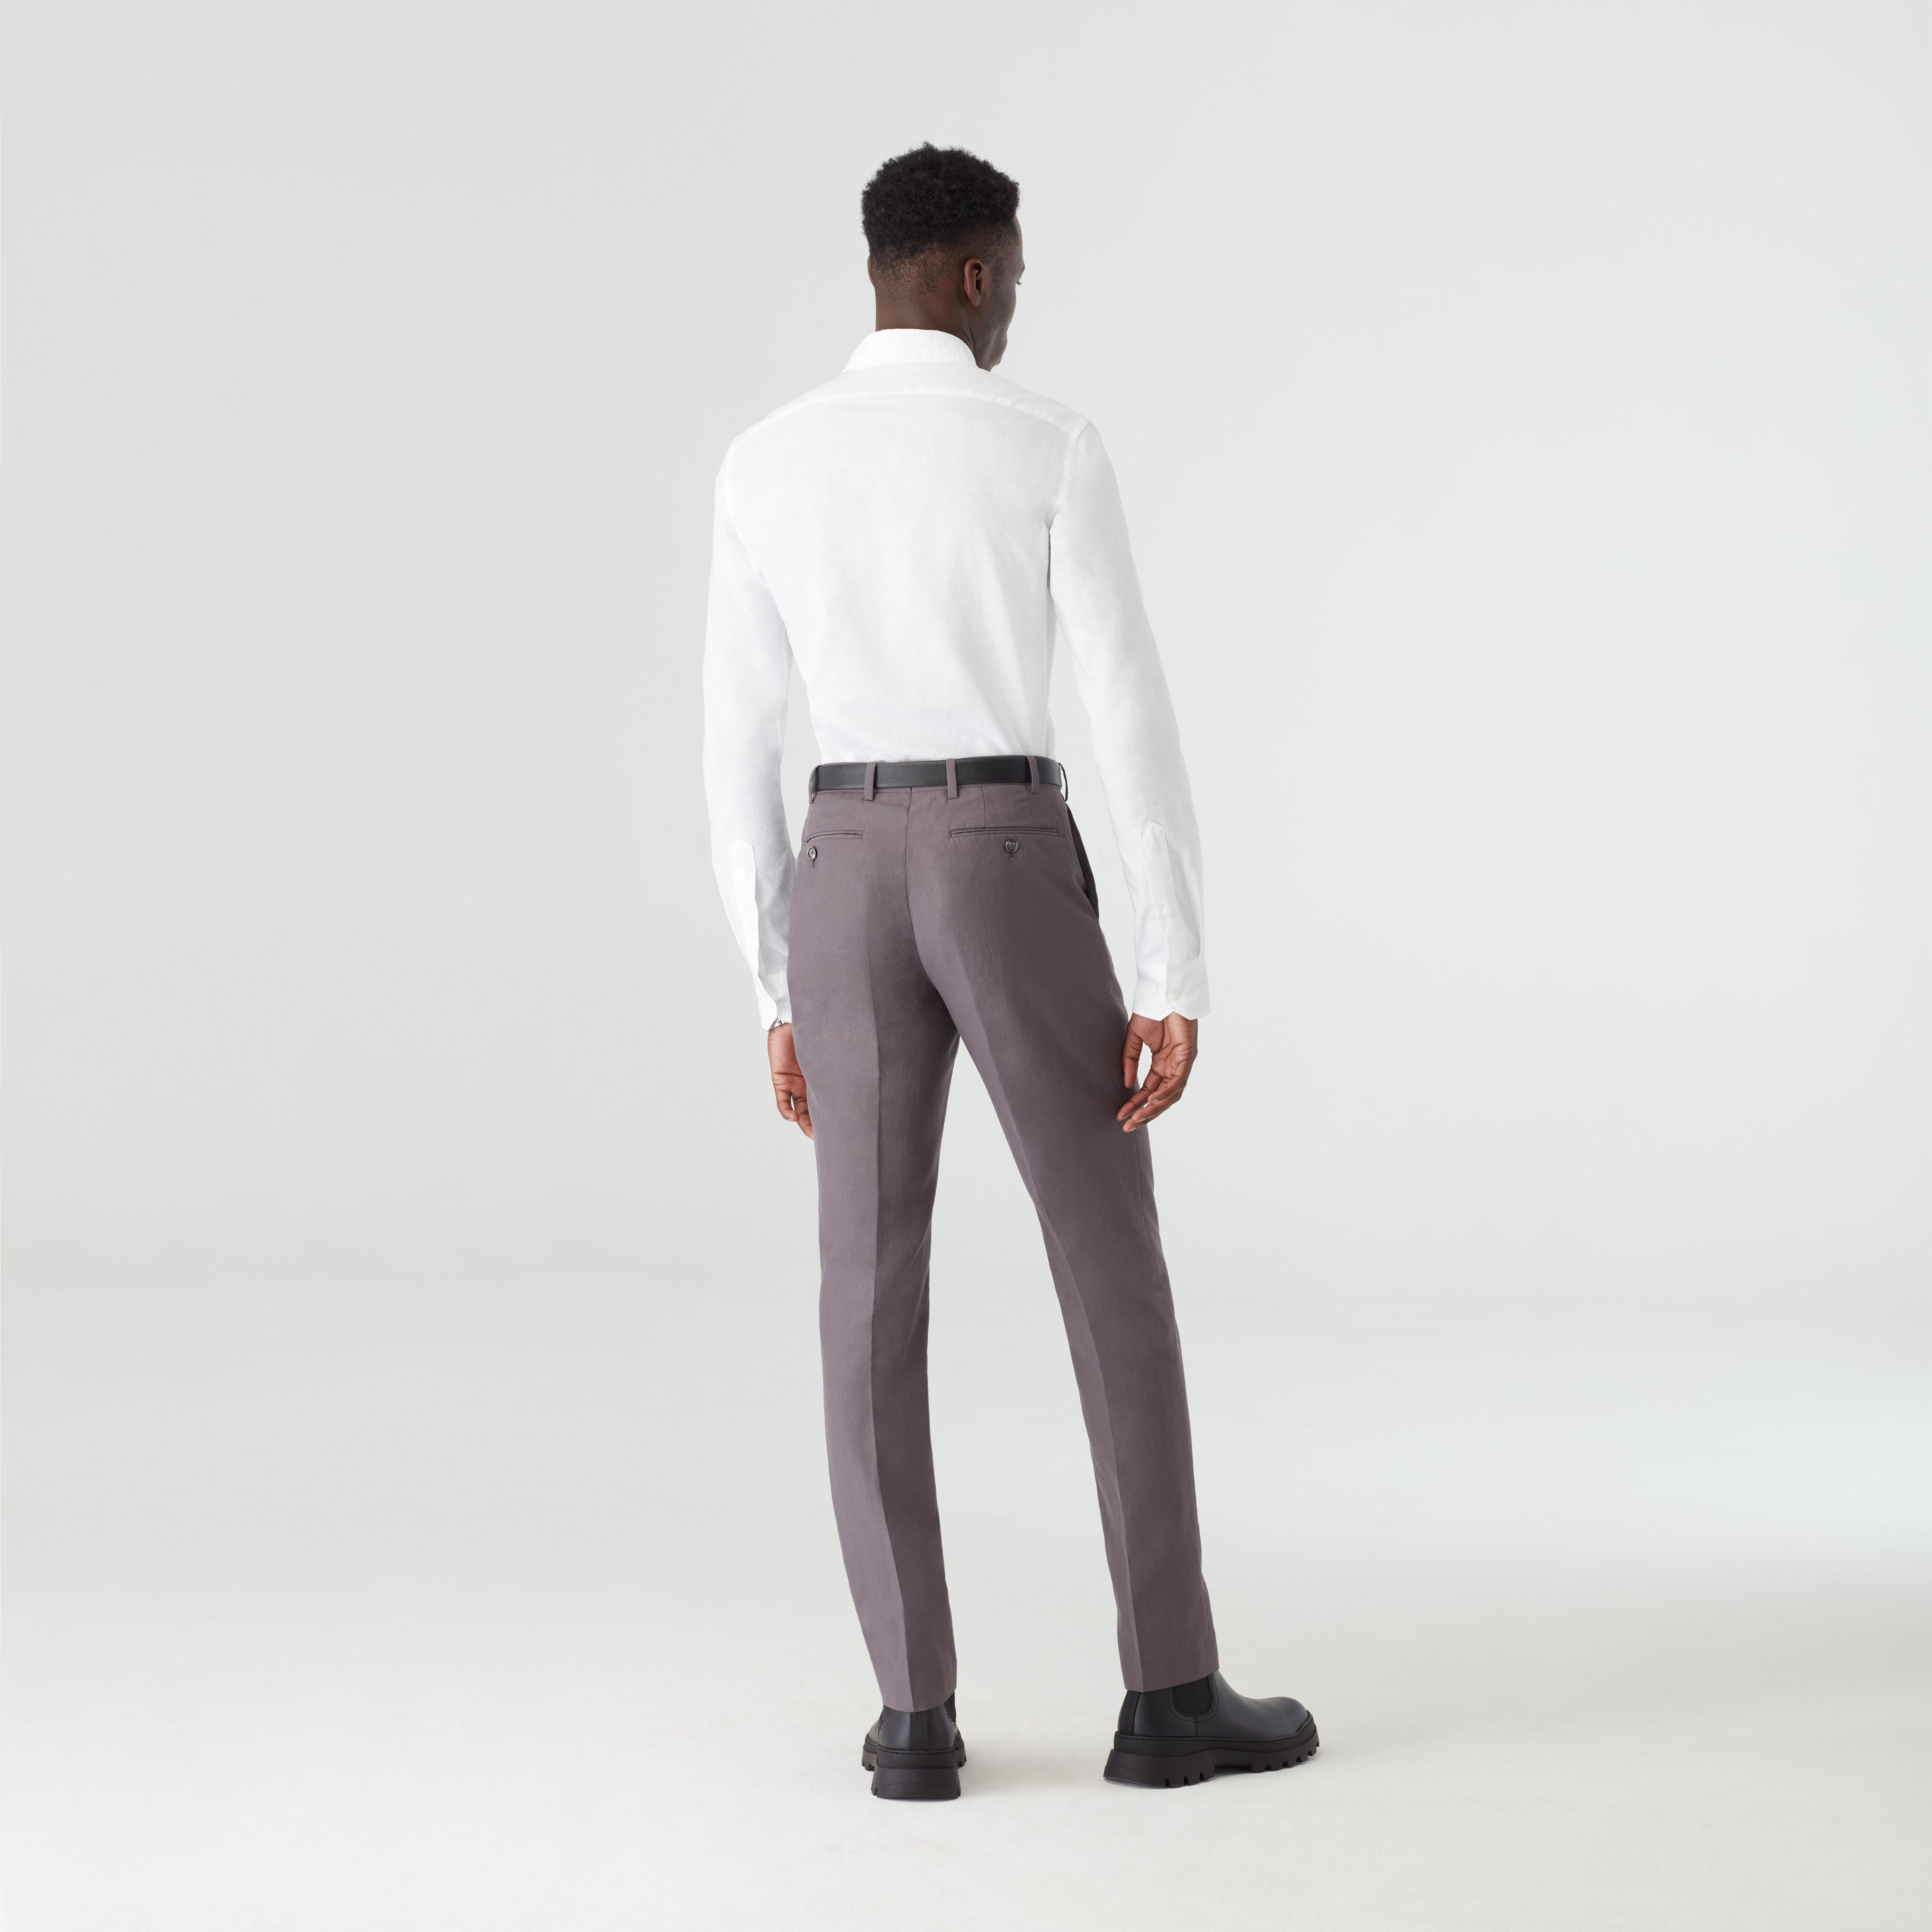 Custom Suits Made For You - Kelly Wool Silk Cement Gray Suit | INDOCHINO